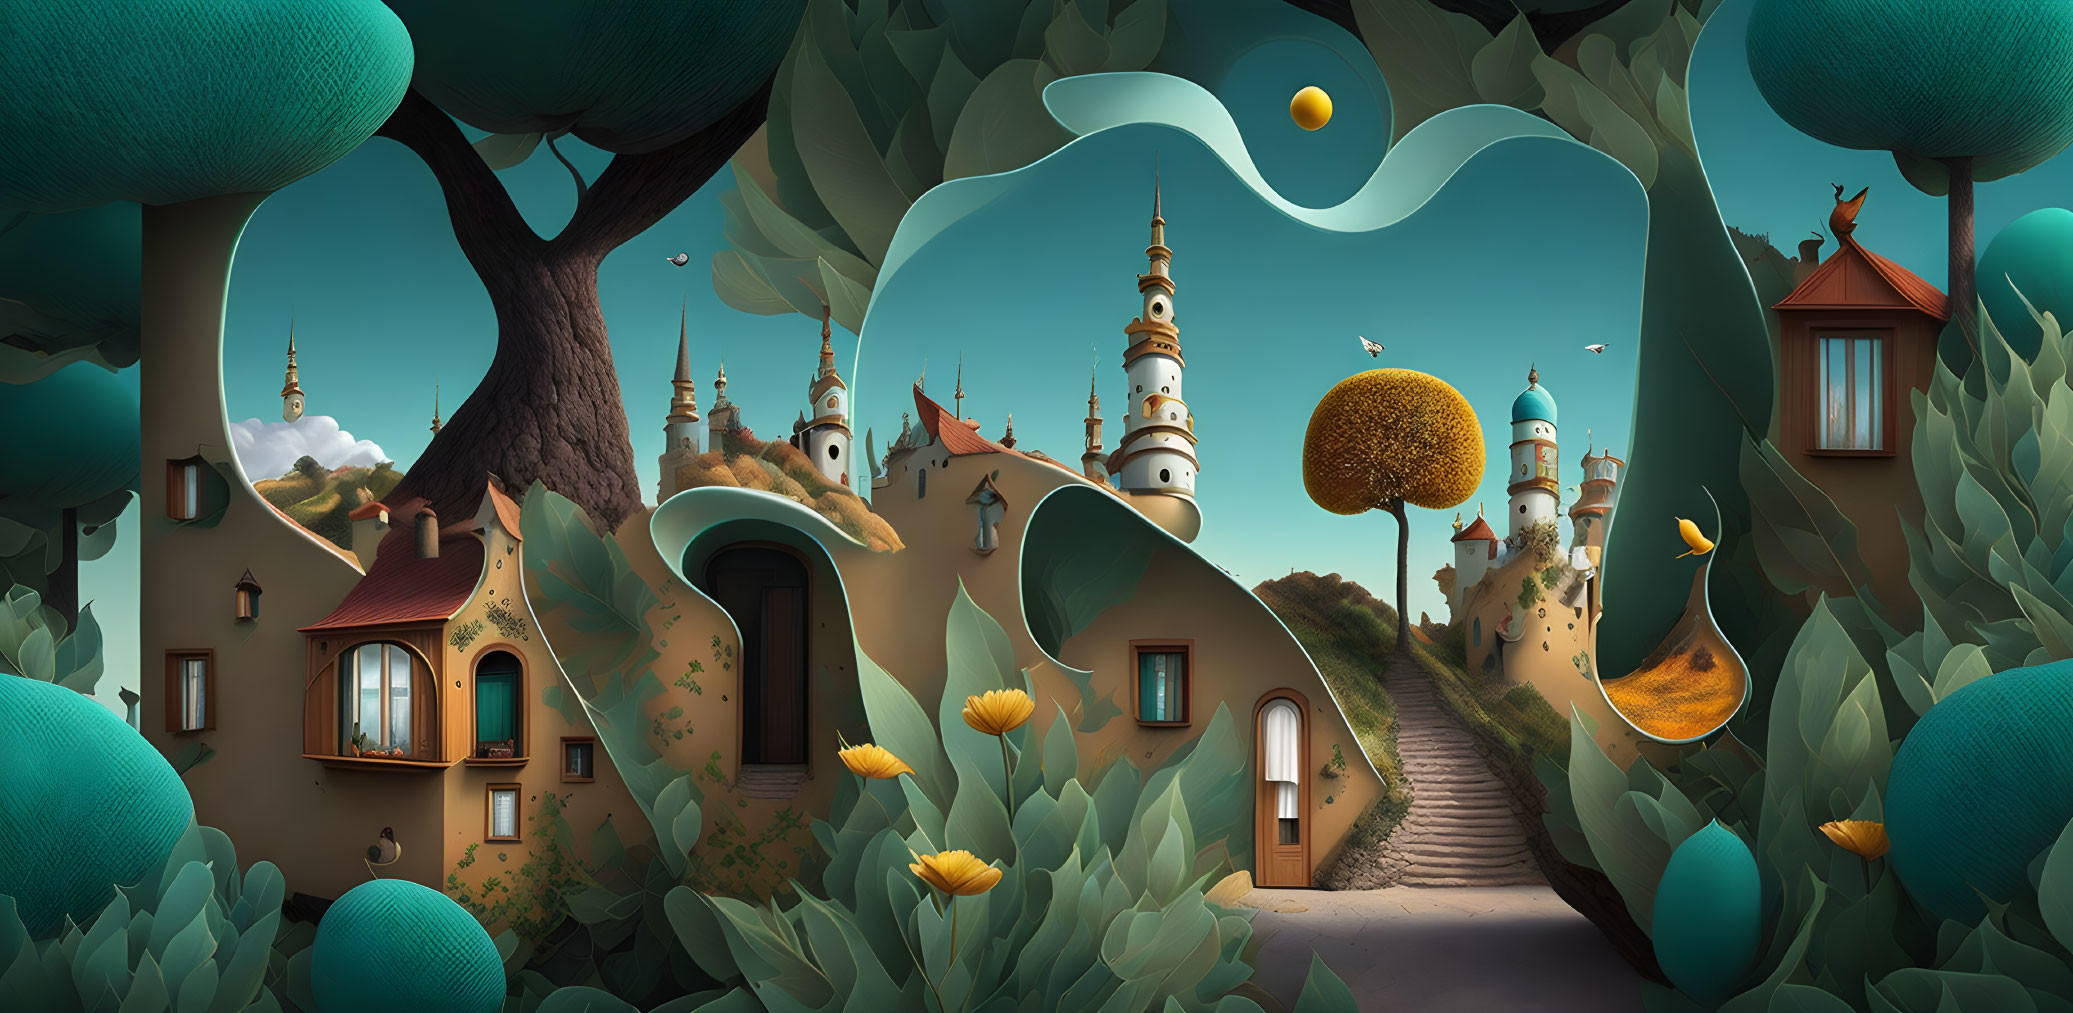 Whimsical landscape with stylized trees, hills, houses, and castle under blue sky